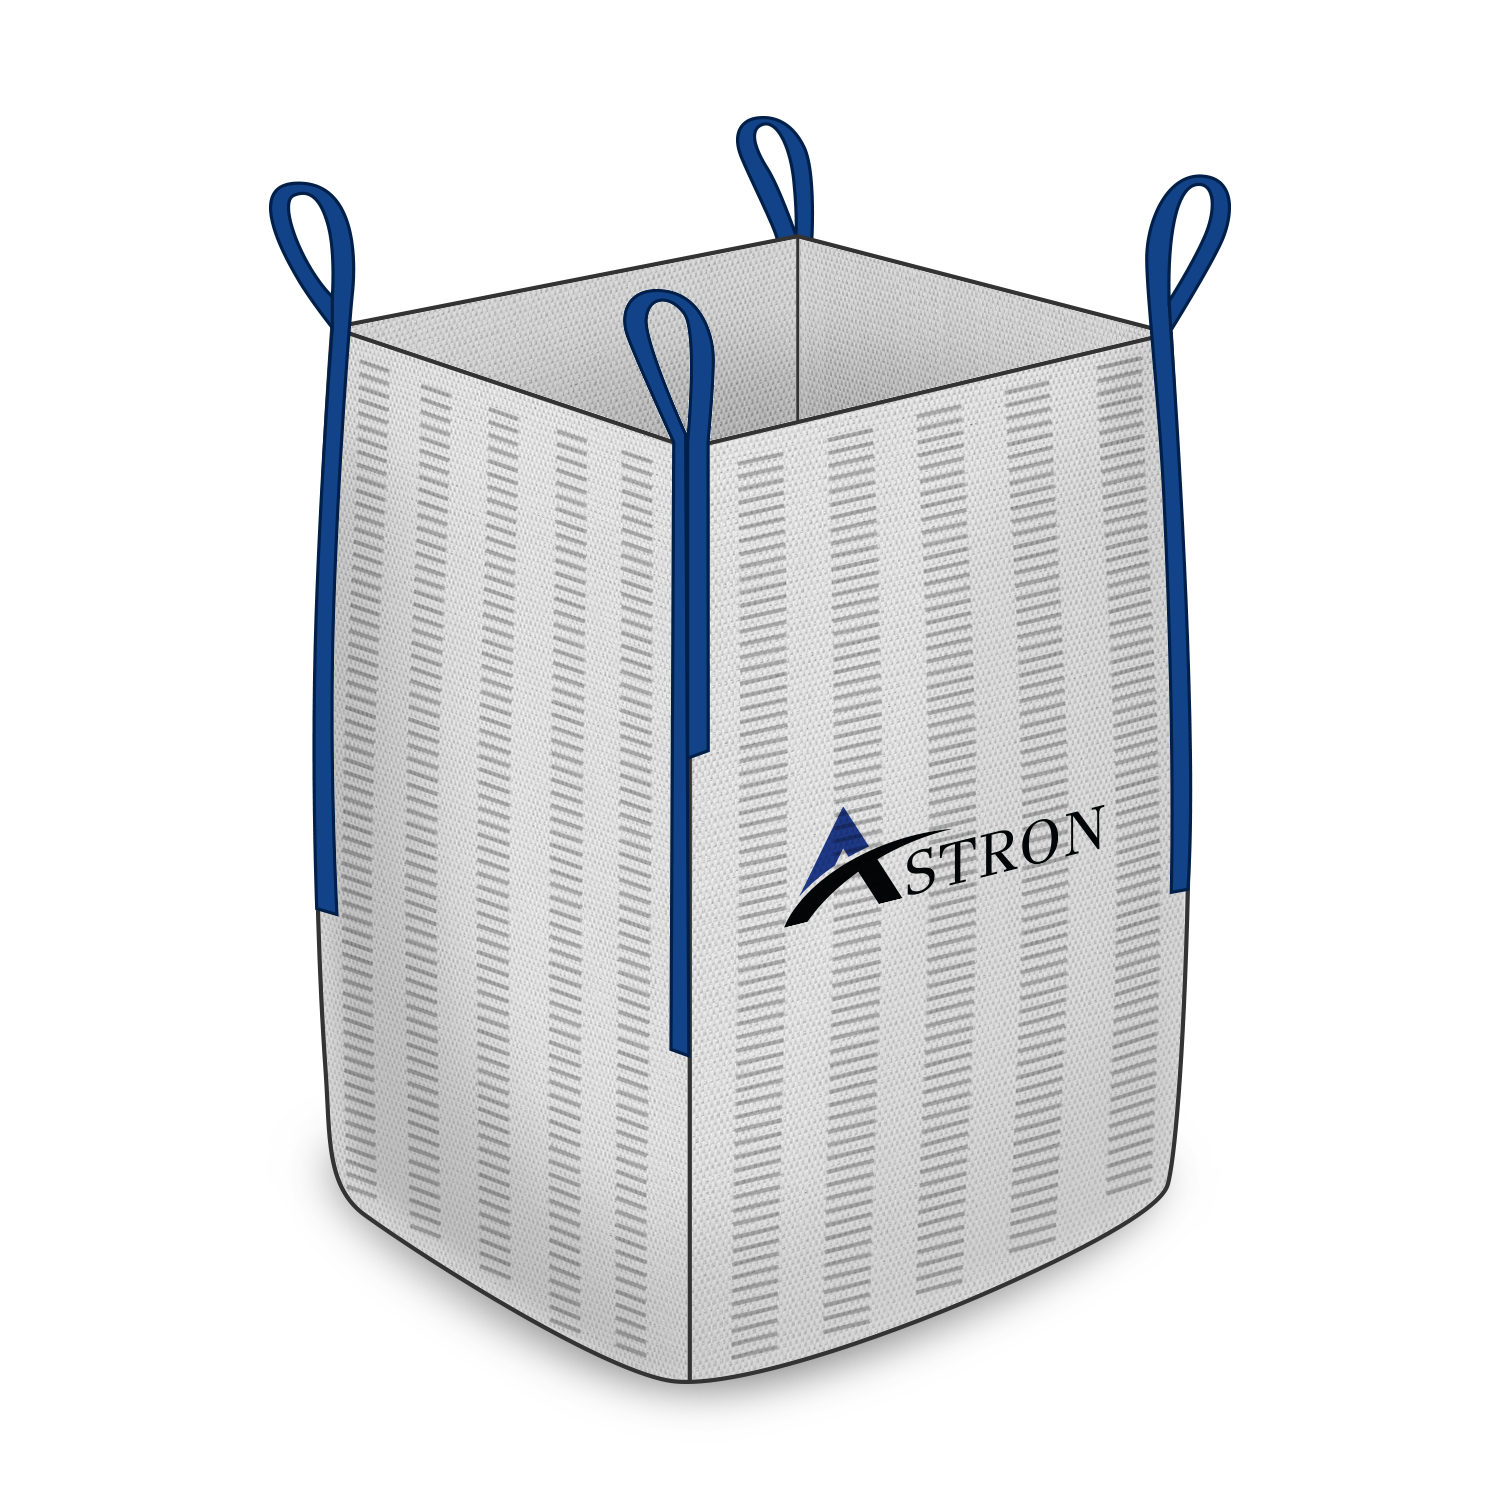 Astron Bulk Bag Manufacturers & Packaging In New Jersey , USA